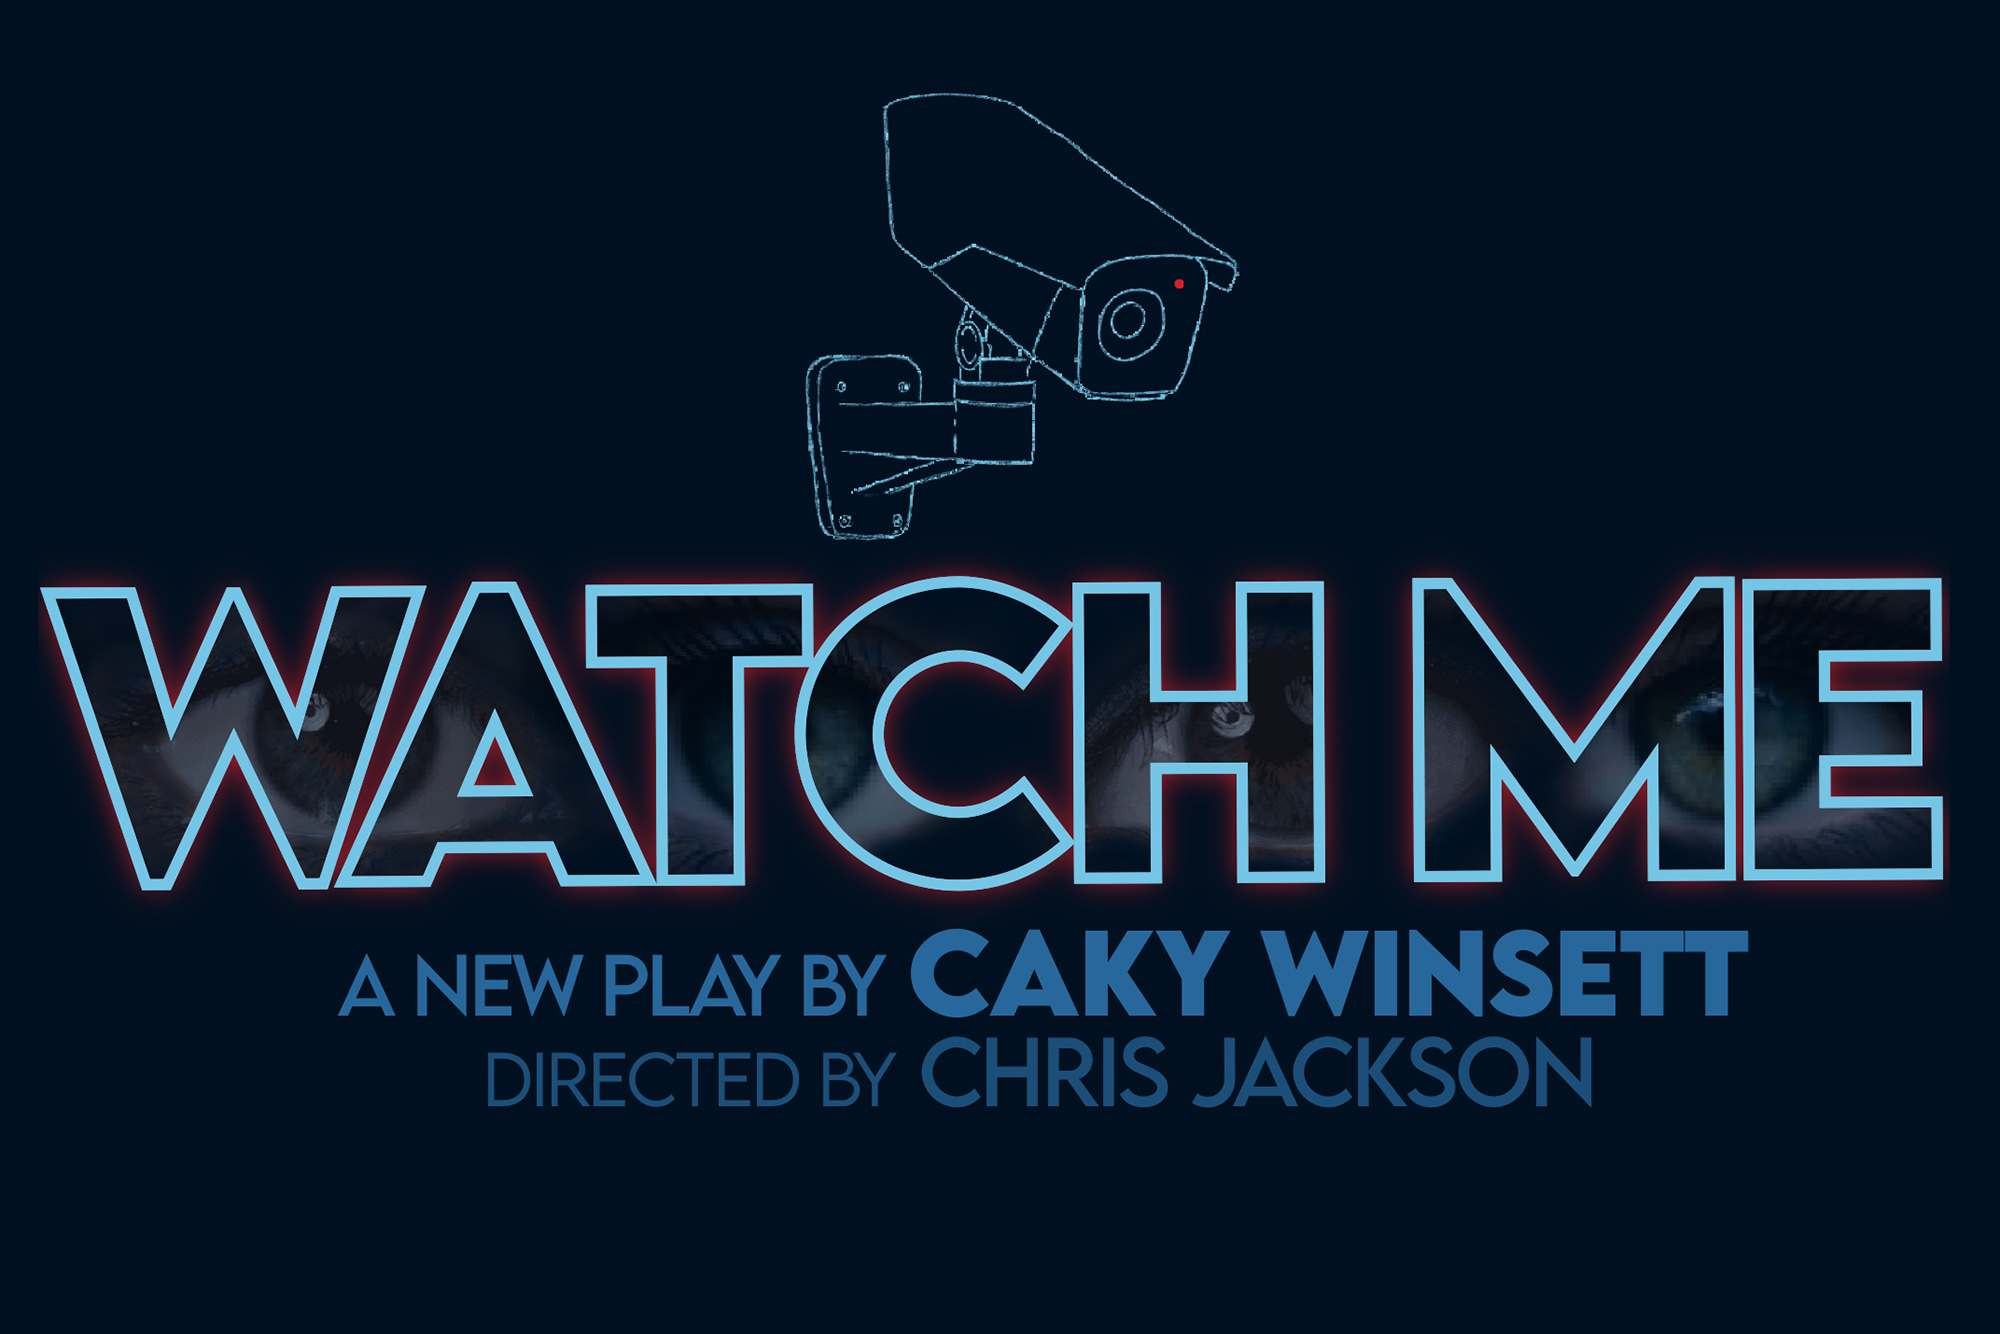 Black background with an illustration of a security camera with the text: Watch me a new play by Caky Winsett directed by Chris Jackson